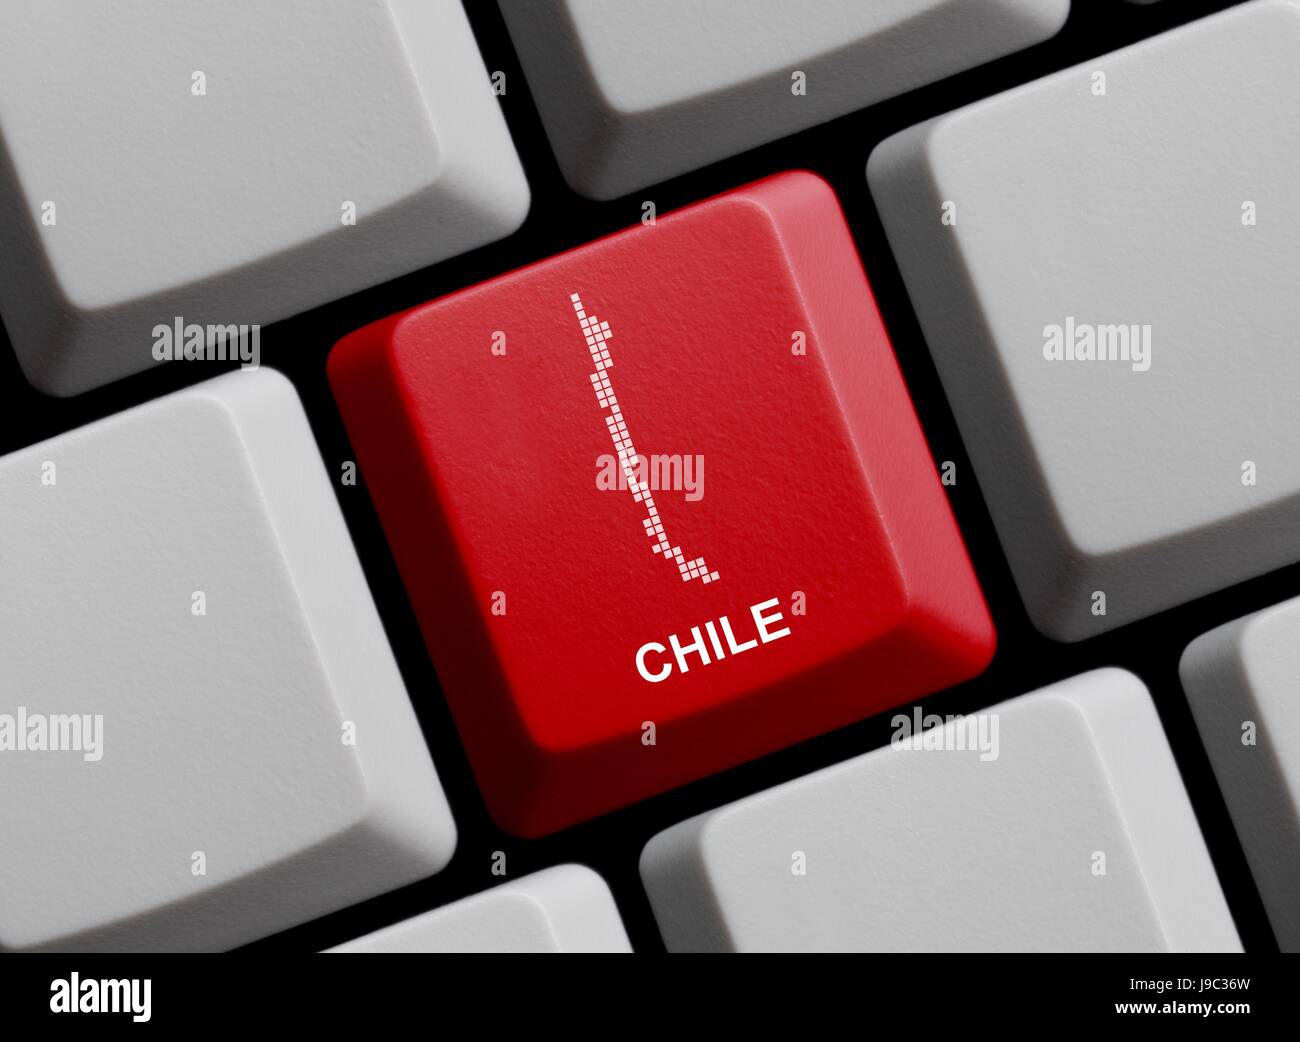 keyboard, chile, card, outline, atlas, map of the world, map, internet, www, Stock Photo